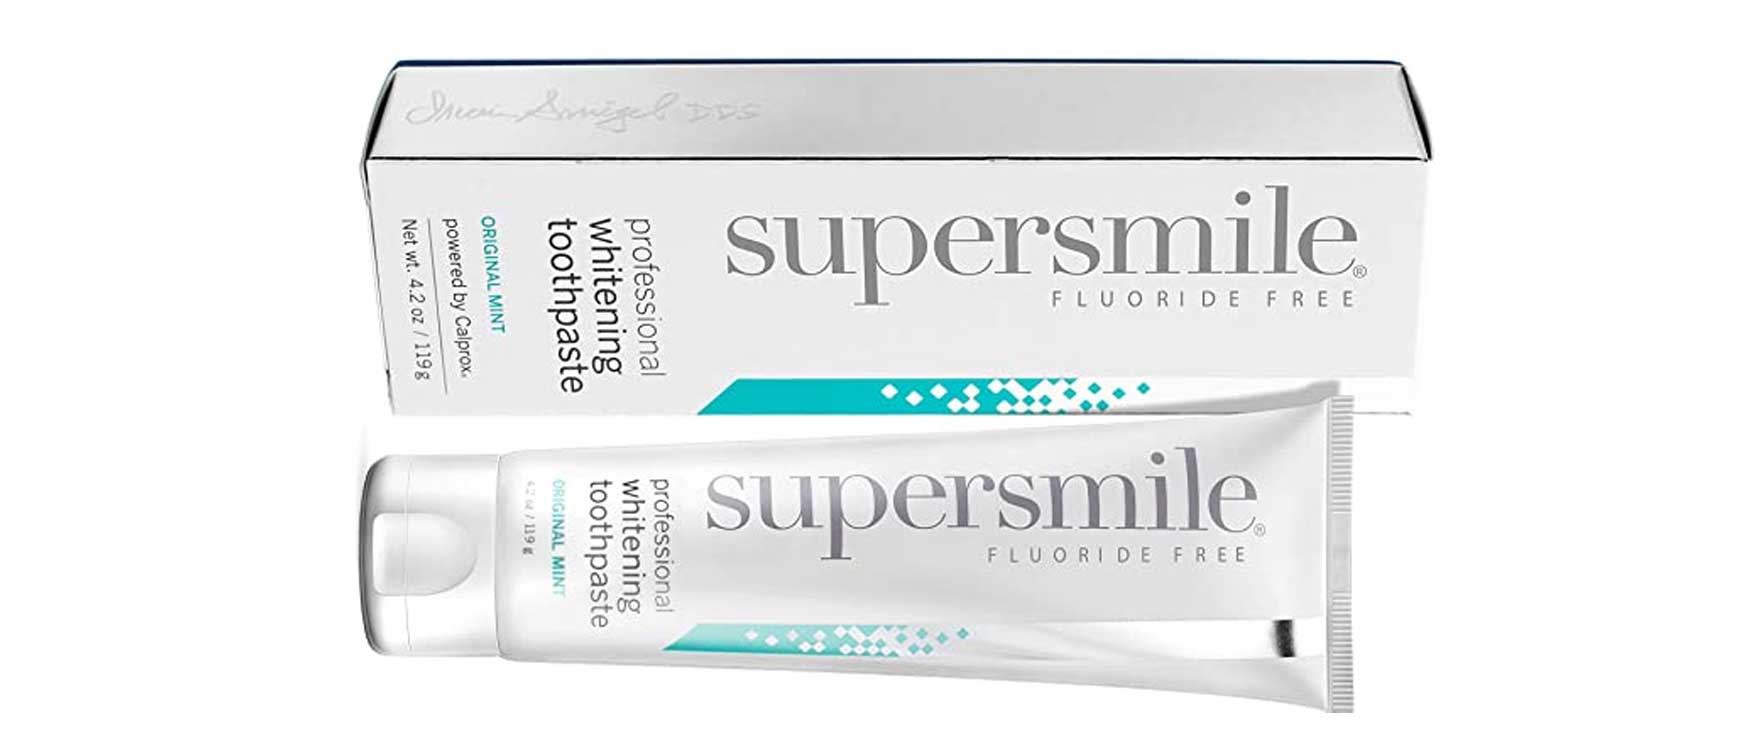 1. Supersmile Professional Whitening Toothpaste with Fluoride